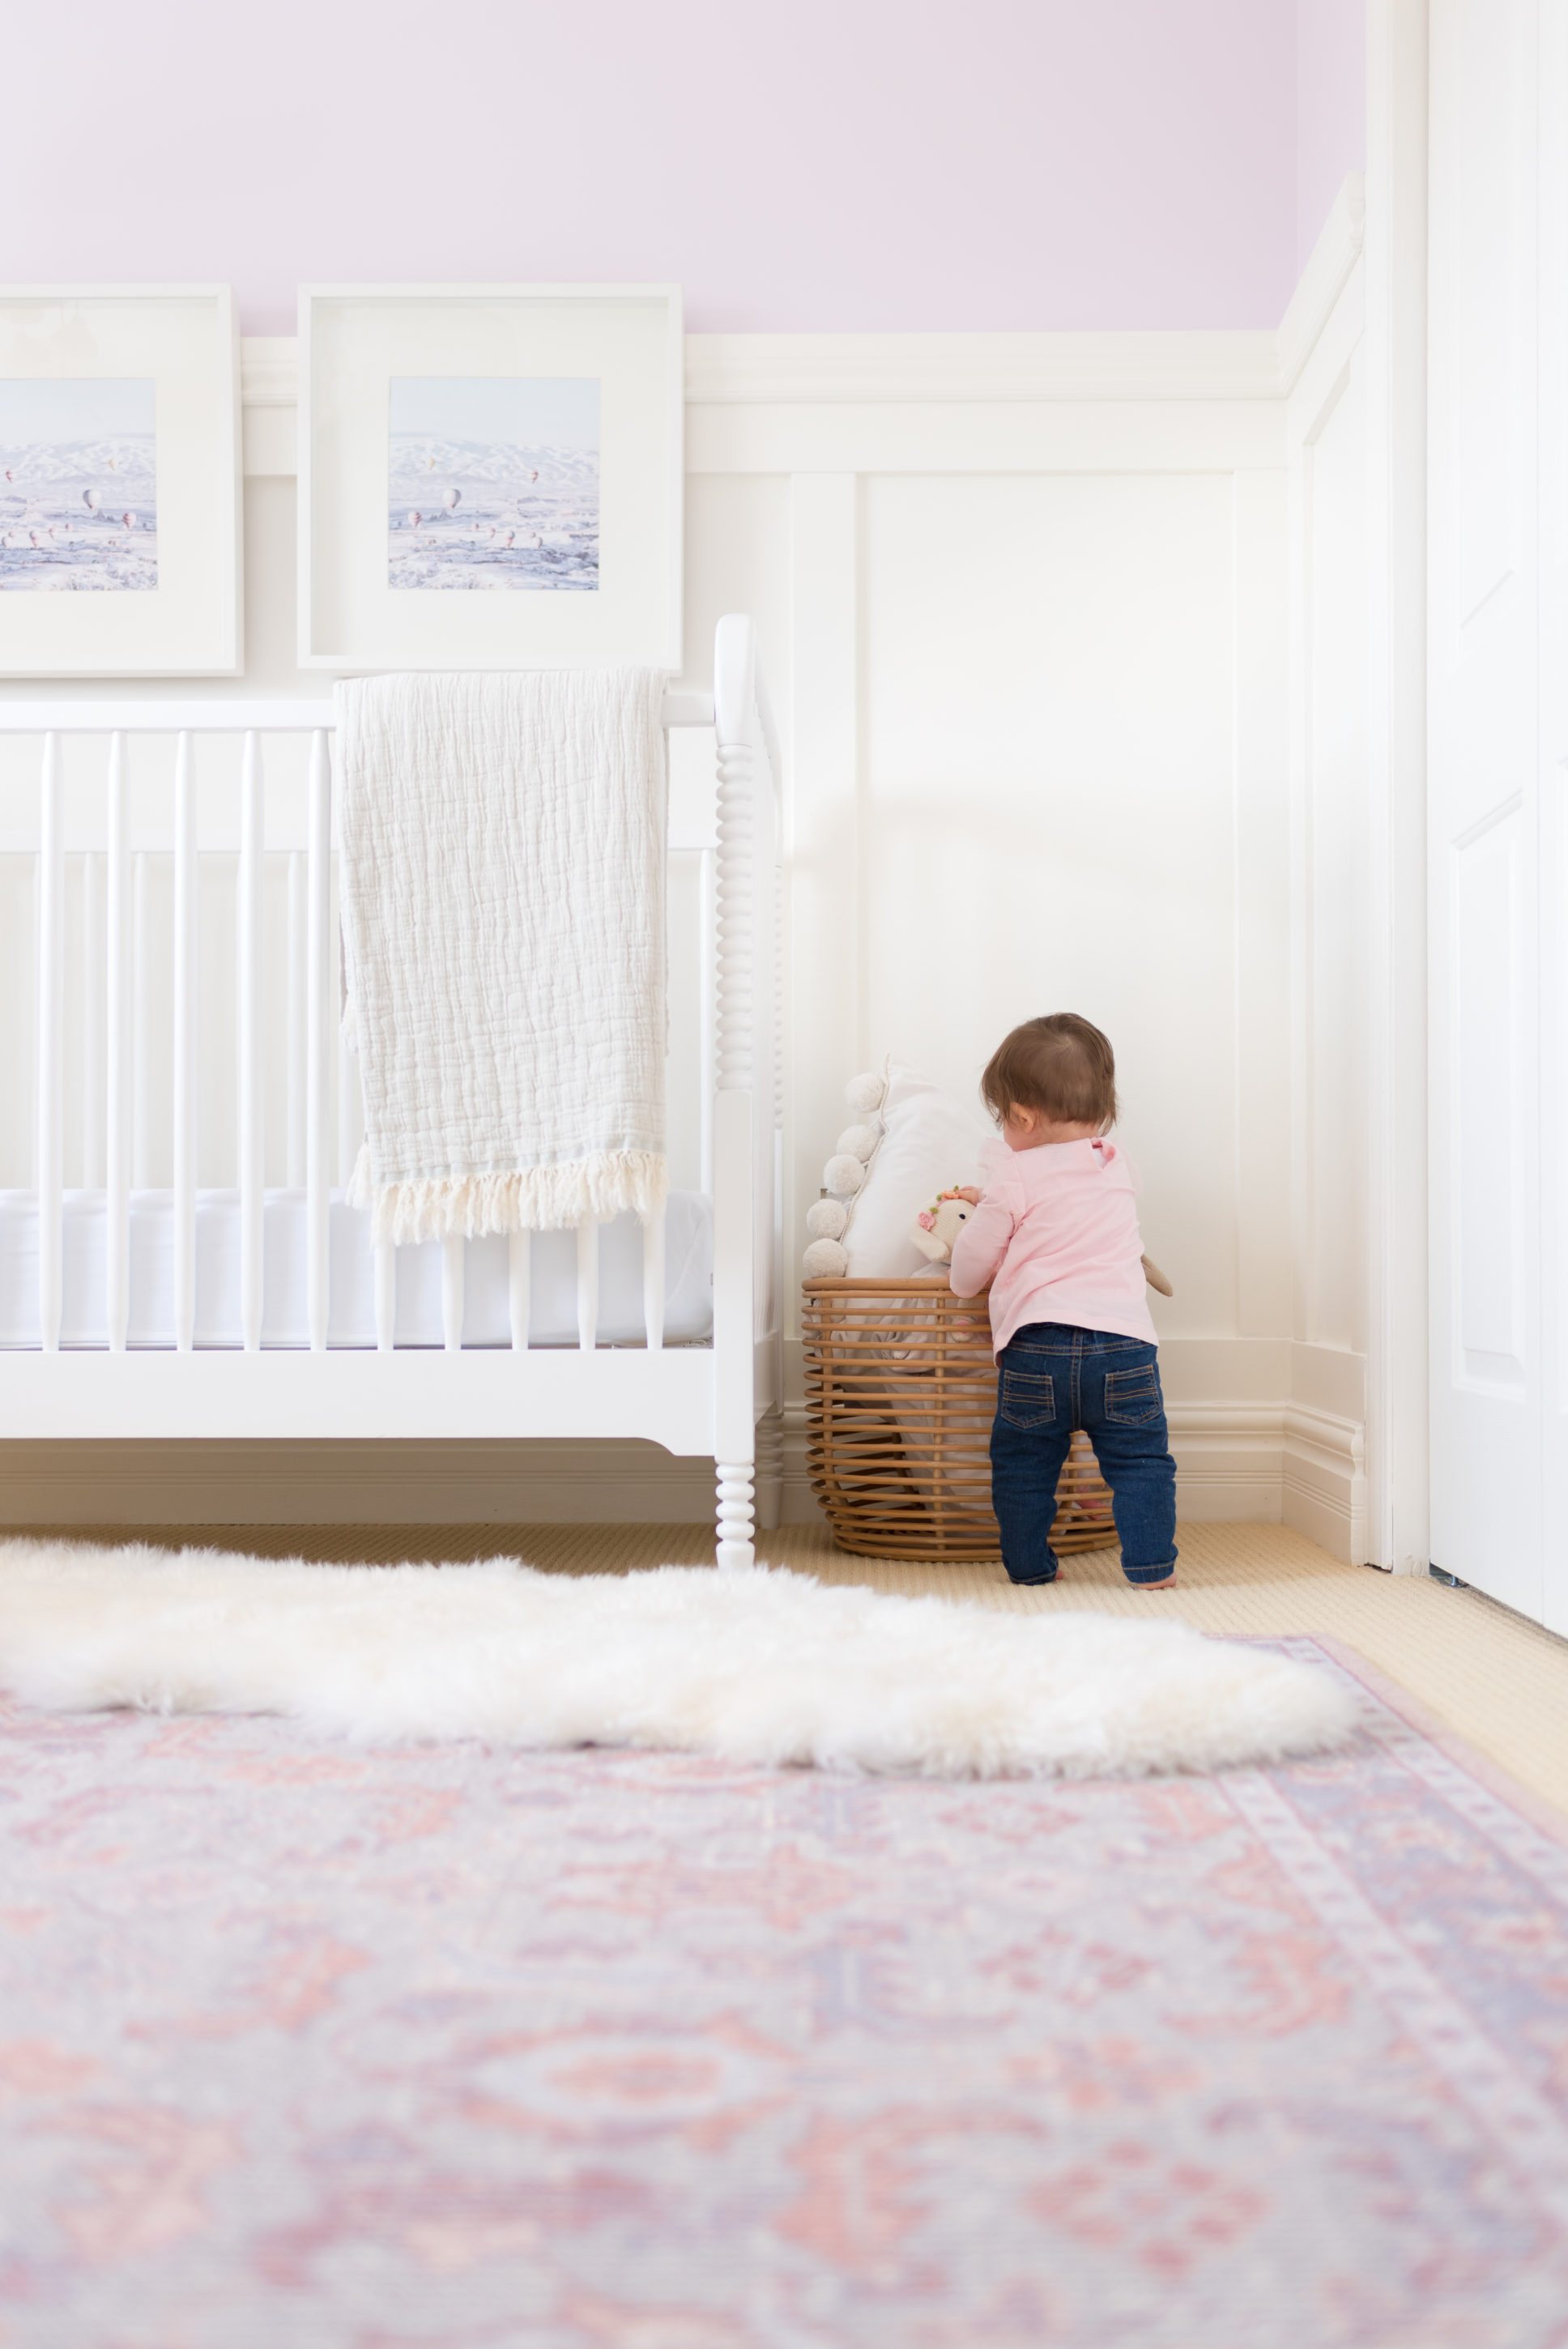 Wool Area Rugs: Natural, toxic-free, hypoallergenic, baby & kids safe -  Rugs by Roo